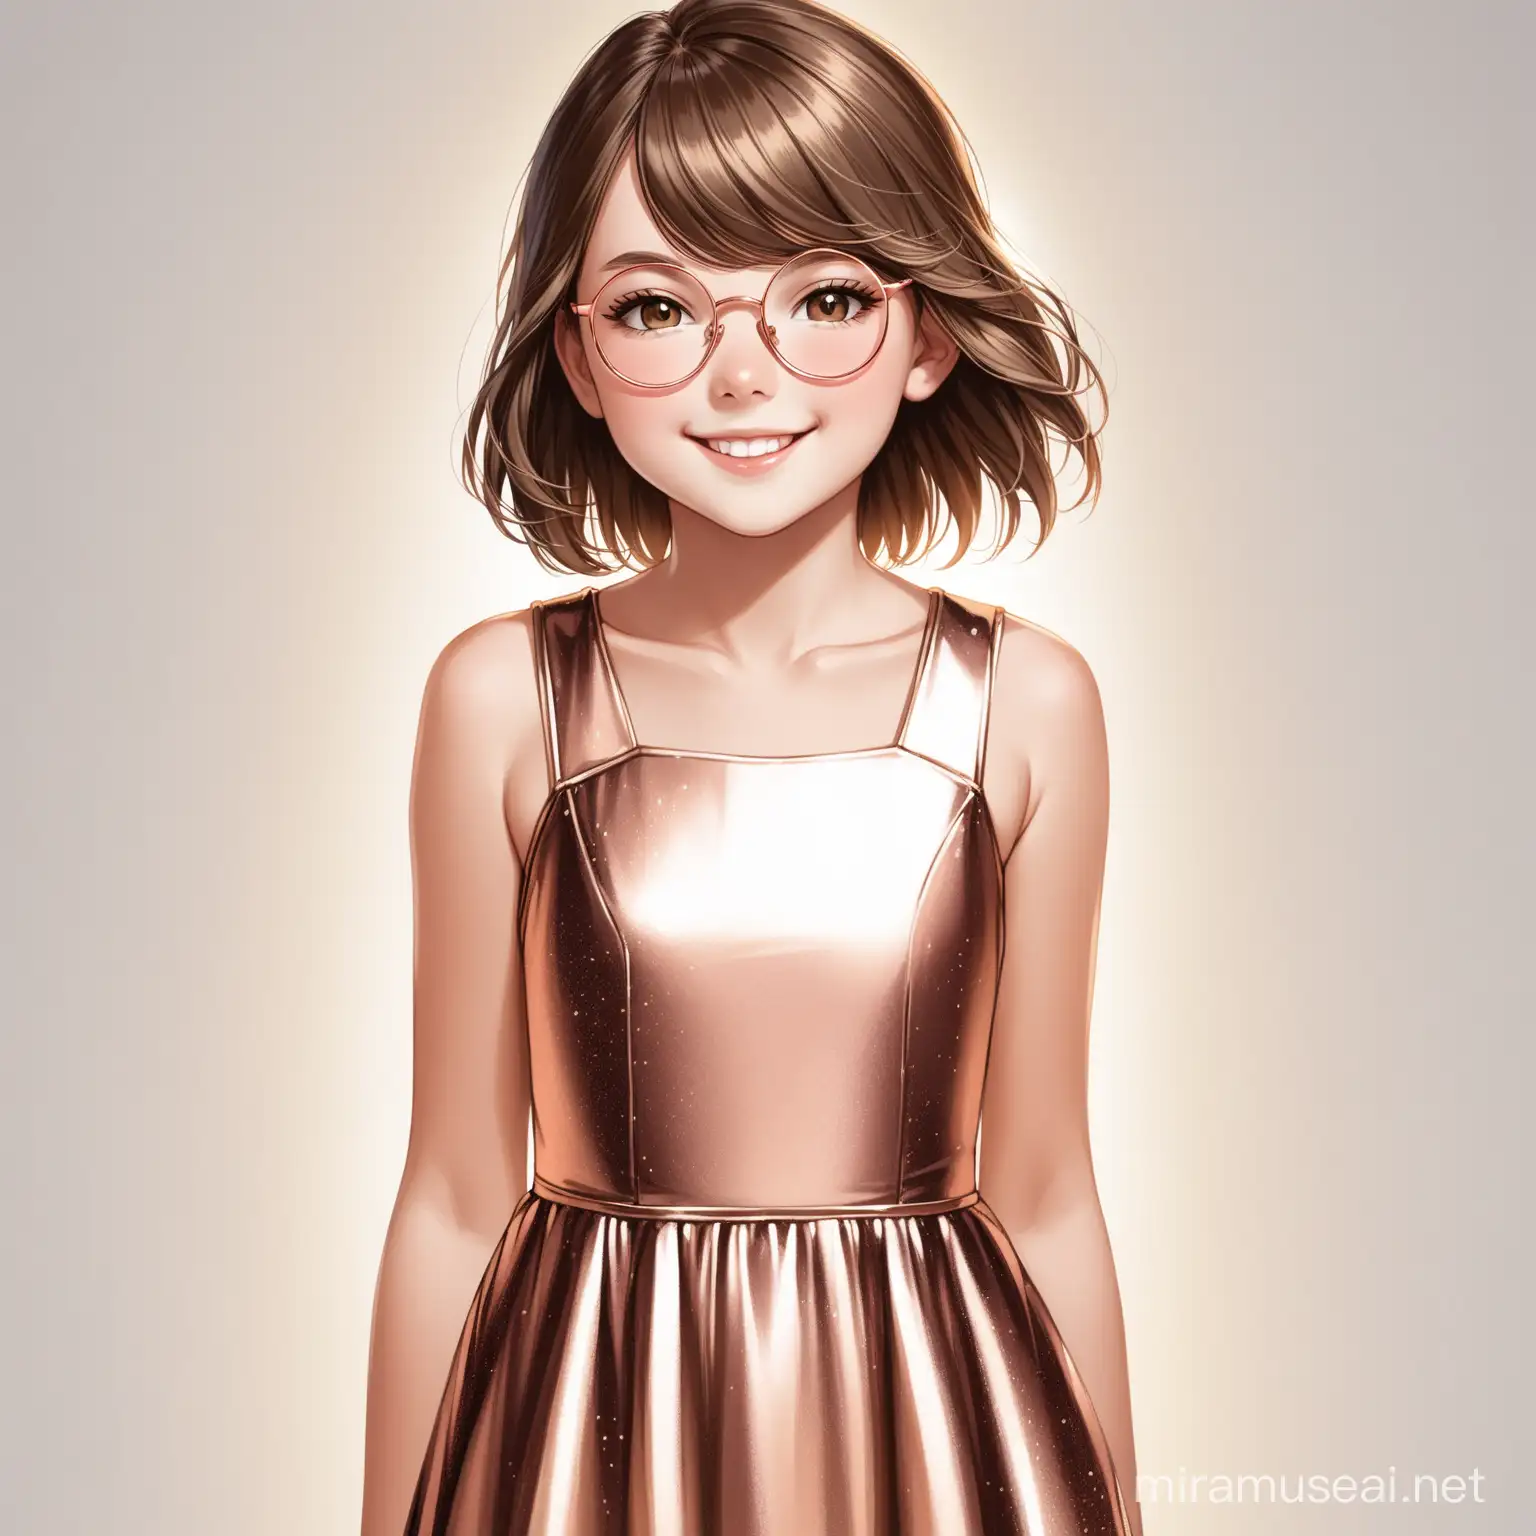 12 year old girl with short brown hair, rose gold glasses, brown eyes, smiling, wearing taylor swift reputation dress